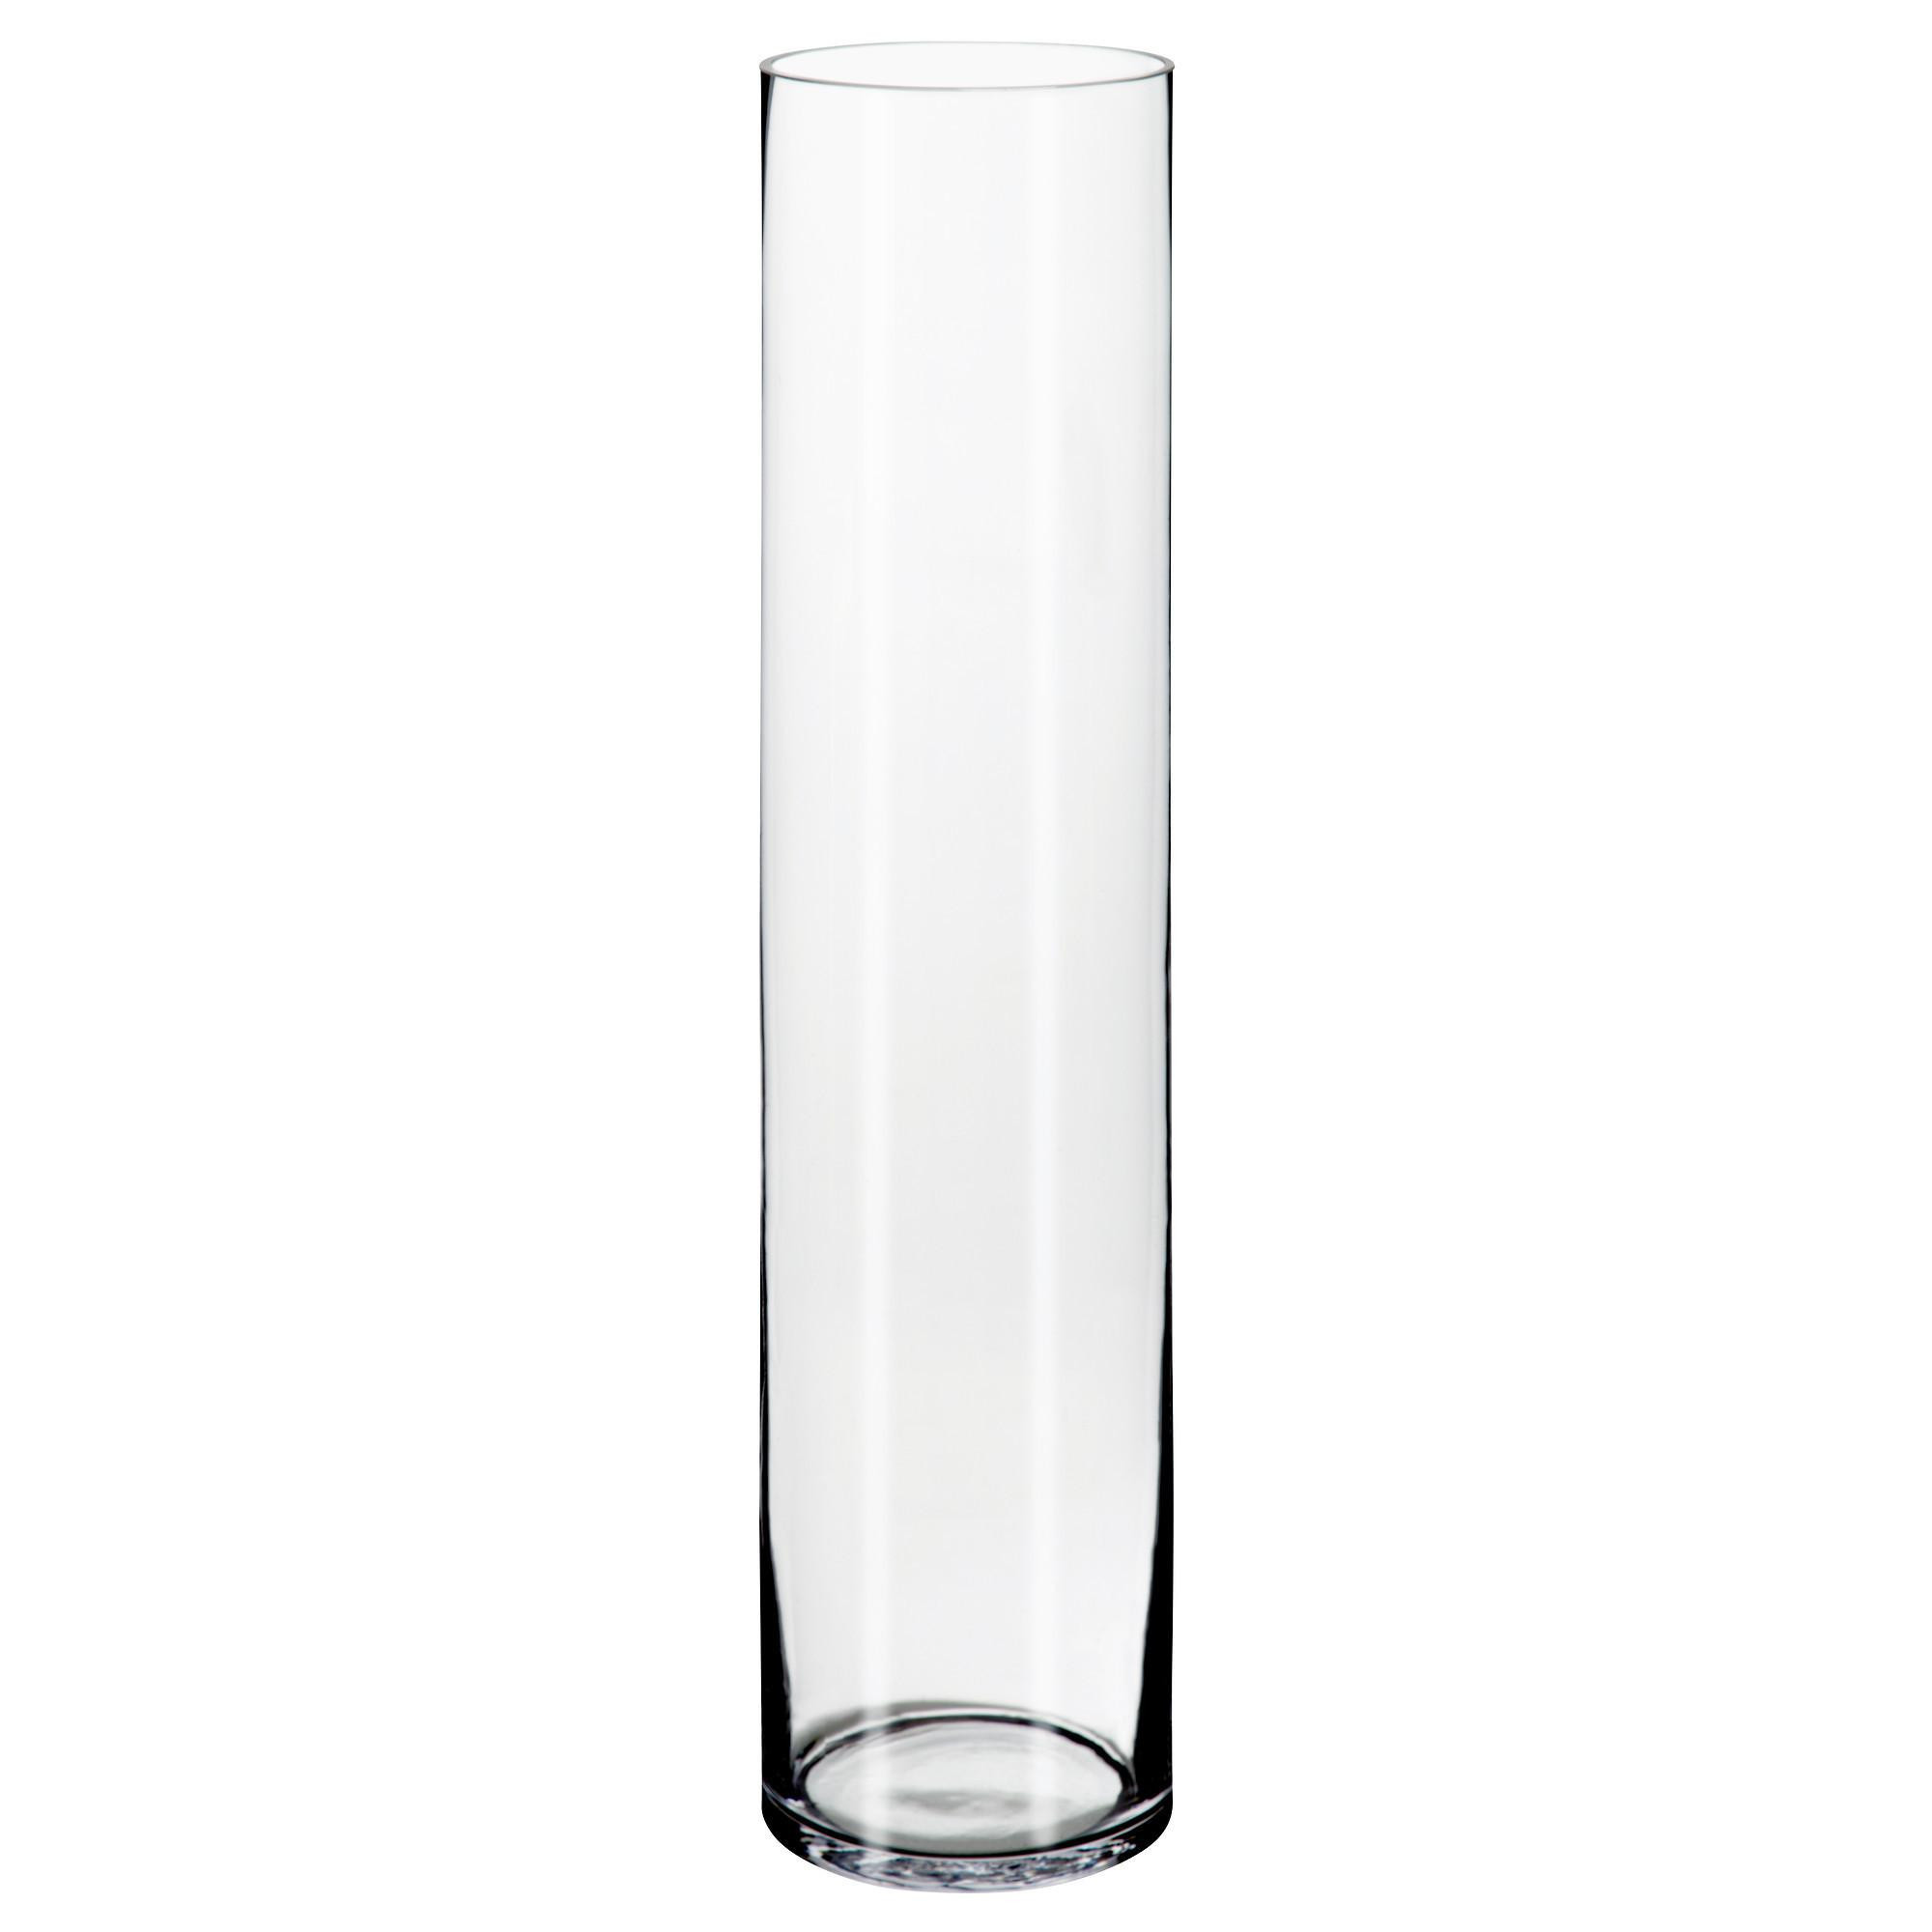 23 Lovable 12 Inch Cylinder Vases Cheap 2024 free download 12 inch cylinder vases cheap of white cylinder vase images 12 inch cylinder vases bulk vase and within white cylinder vase photograph ikea white chair unique living room vase glass fresh pe 